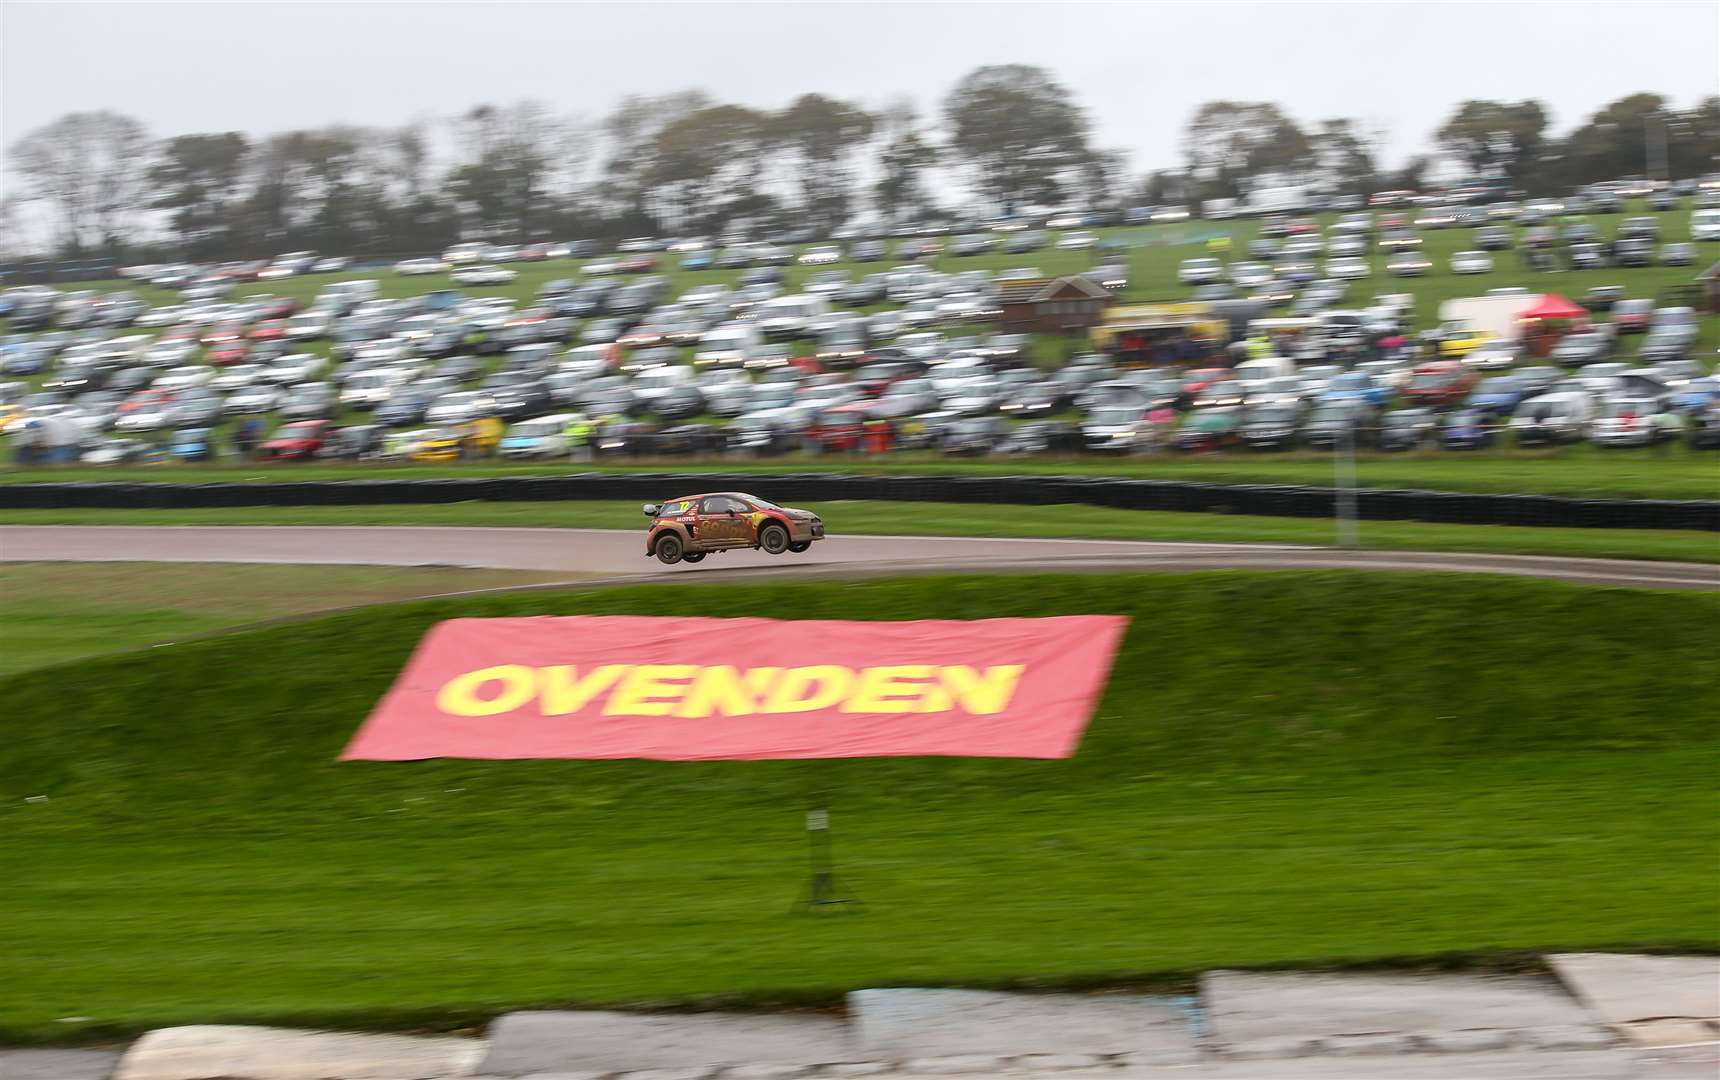 Tristan Ovenden, Adrian's son, competing in the British Rallycross Championship at Lydden Hill. Picture: Matt Bristow